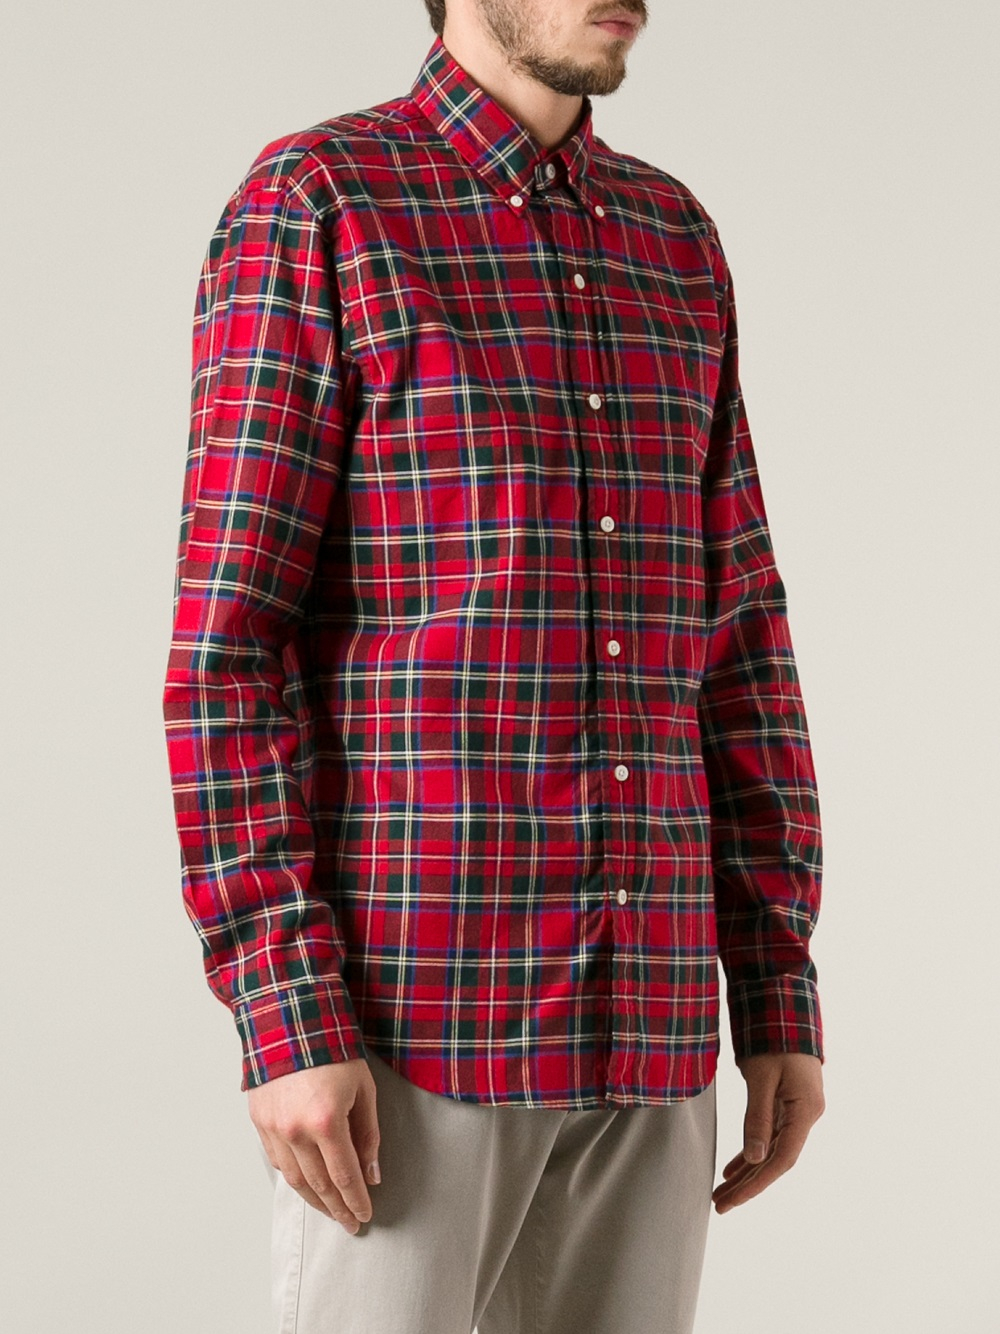 mens red button down shirts